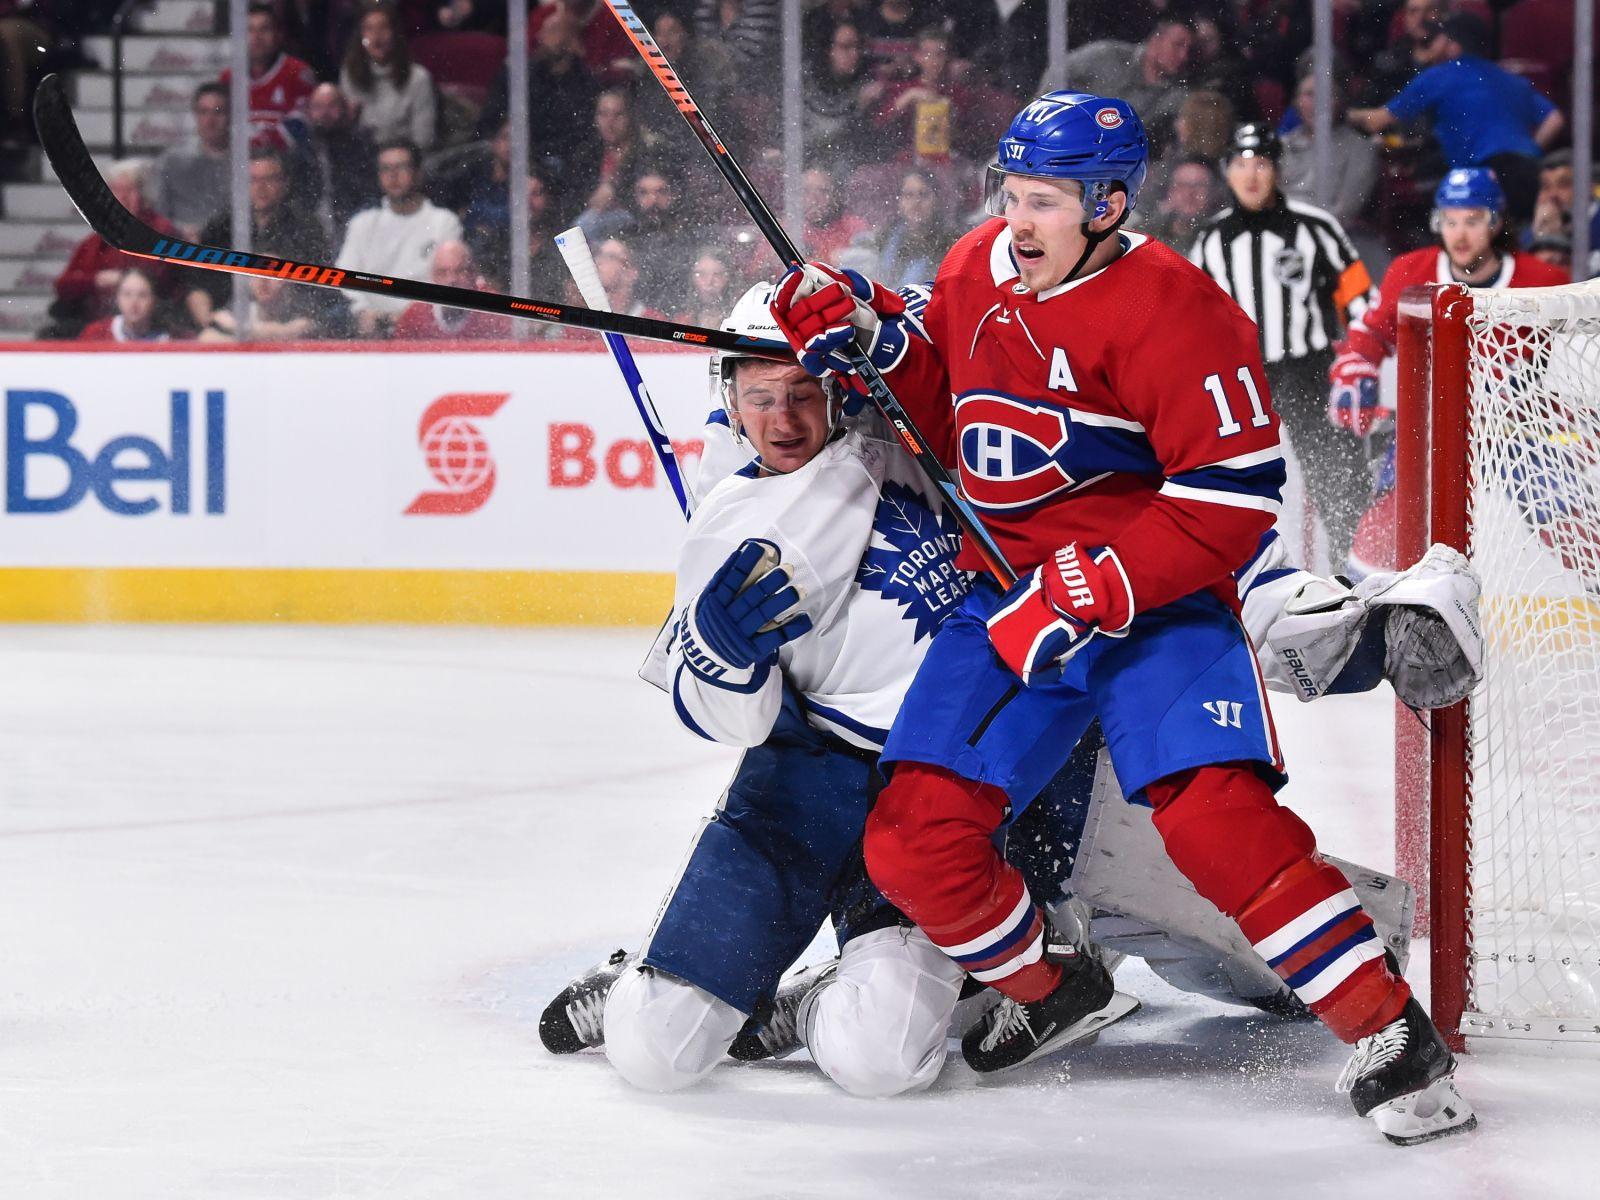 Montreal Canadiens: Brendan Gallagher is among the NHL's